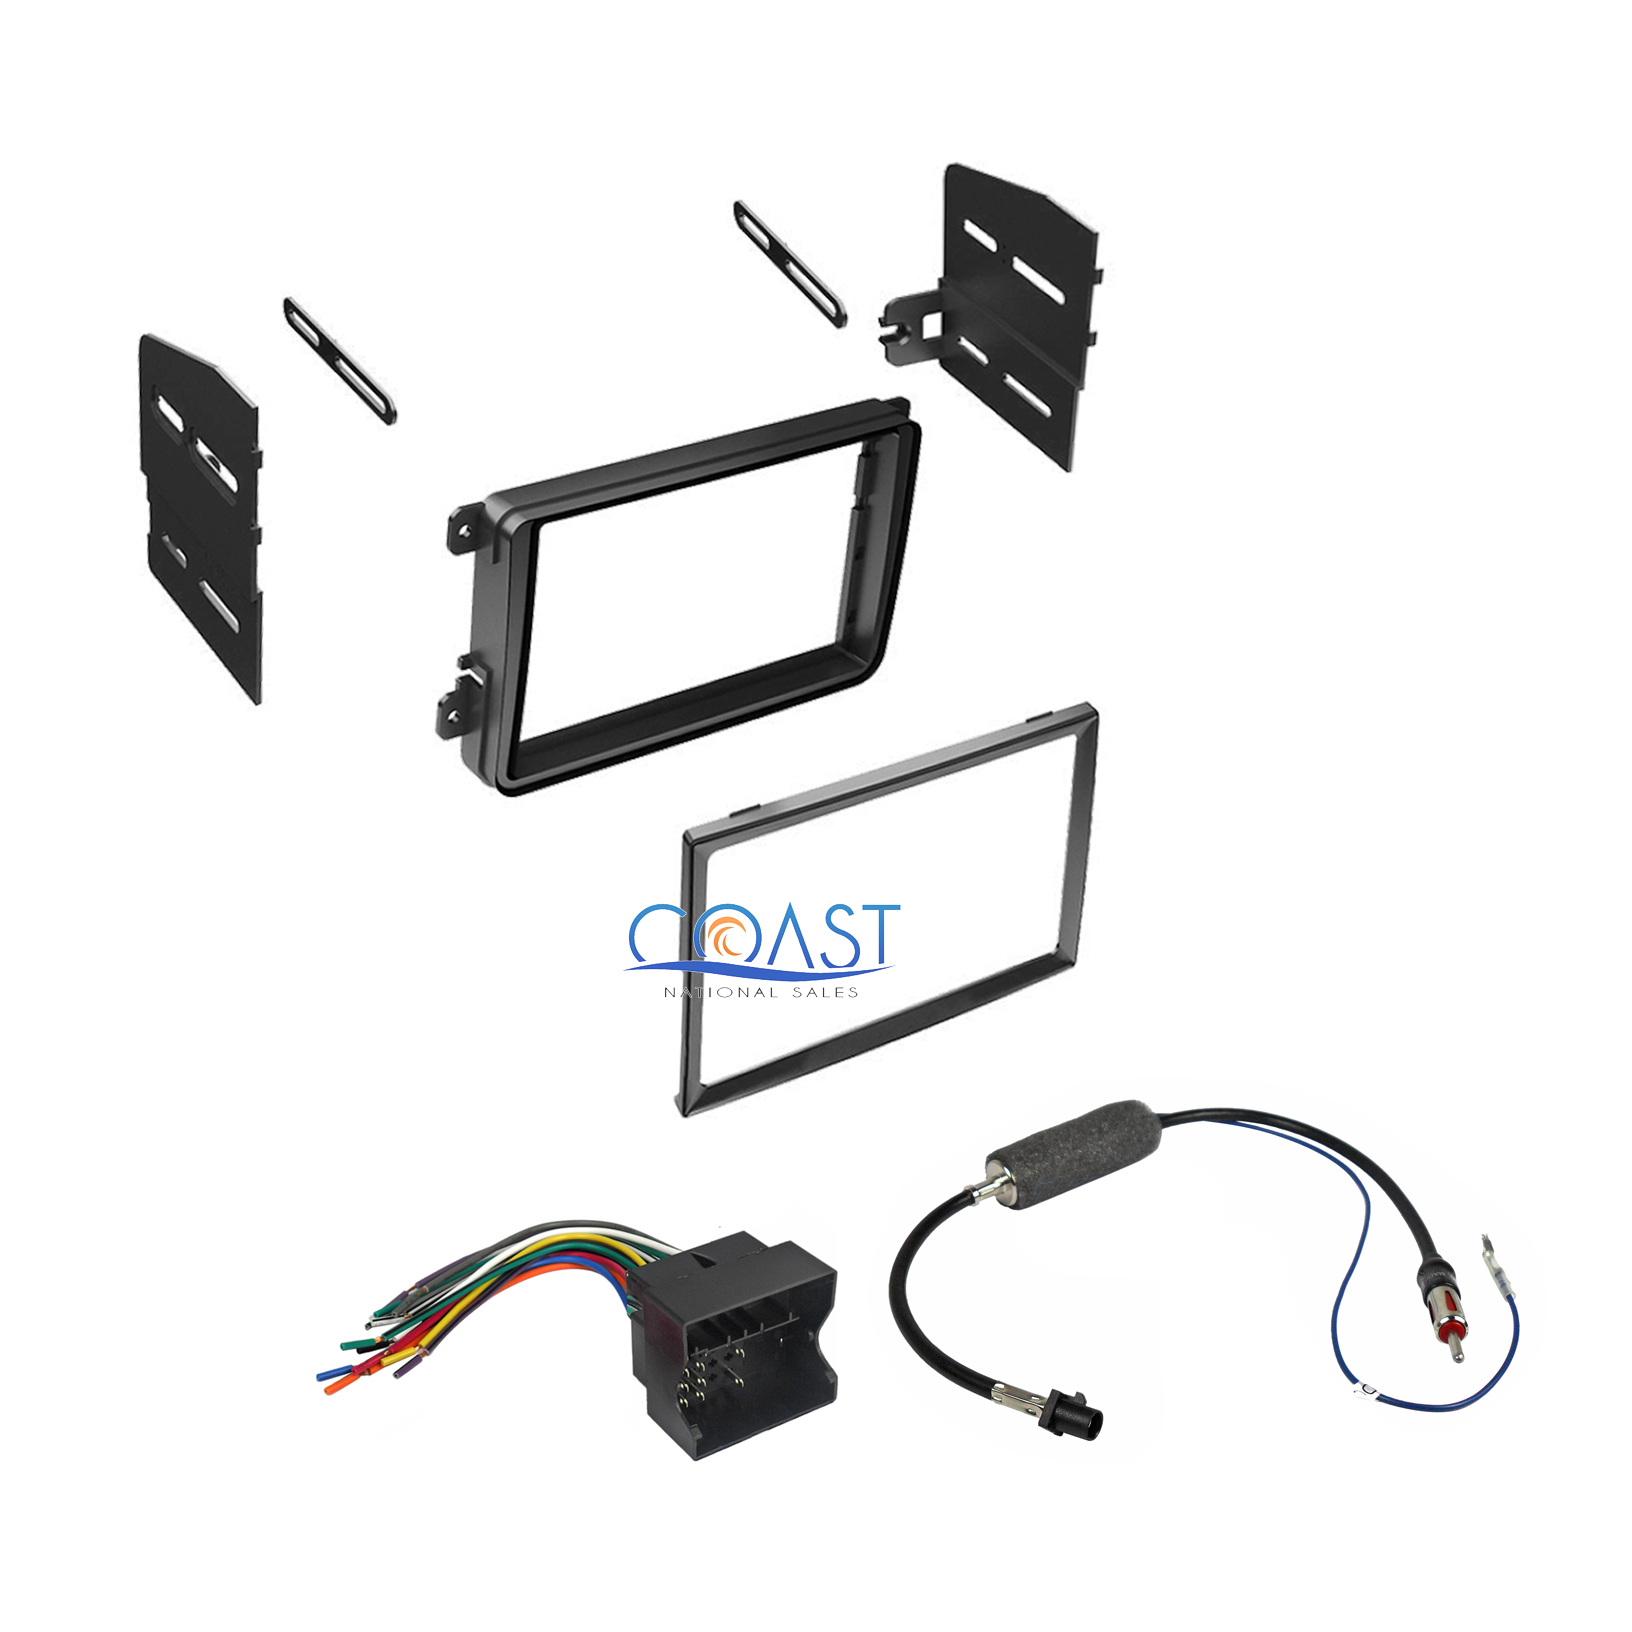 Double DIN Car Stereo Dash Kit Harness Antenna for 2005